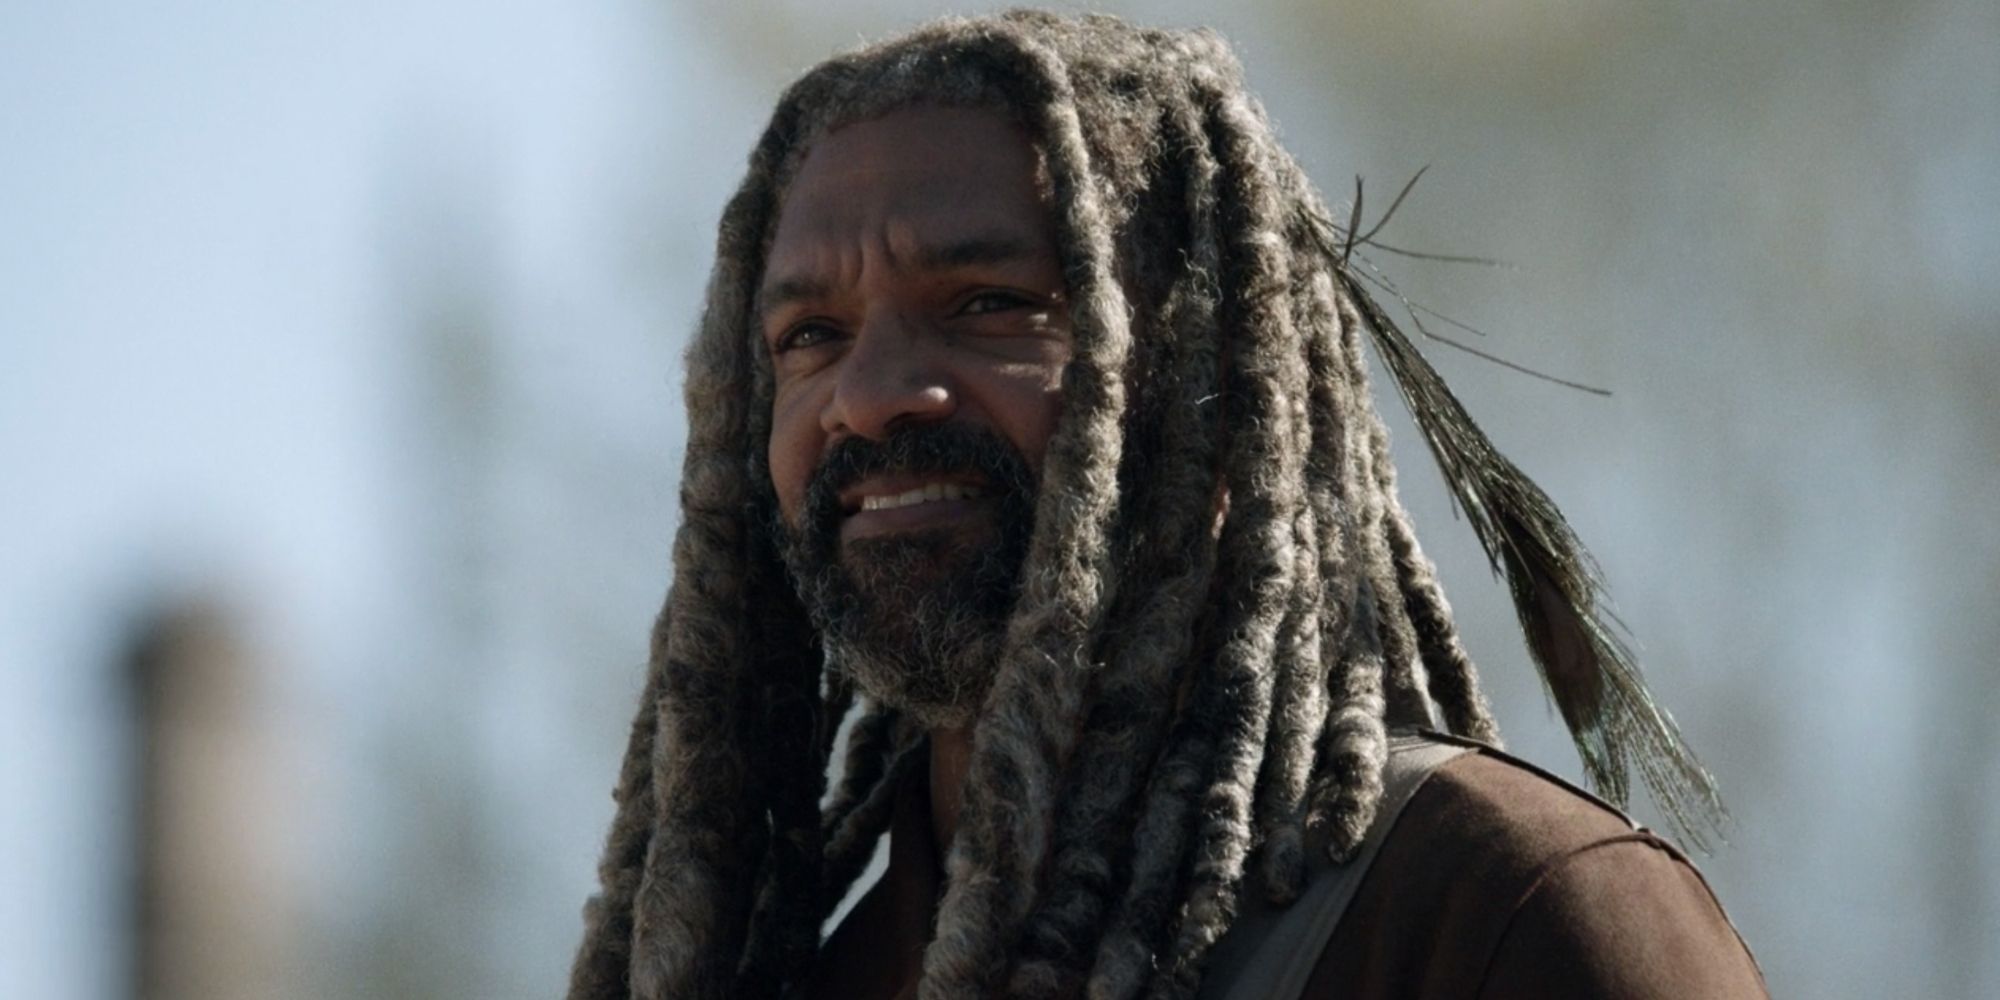 Khary Payton as Ezekiel ruling the Commonwealth in The Walking Dead finale